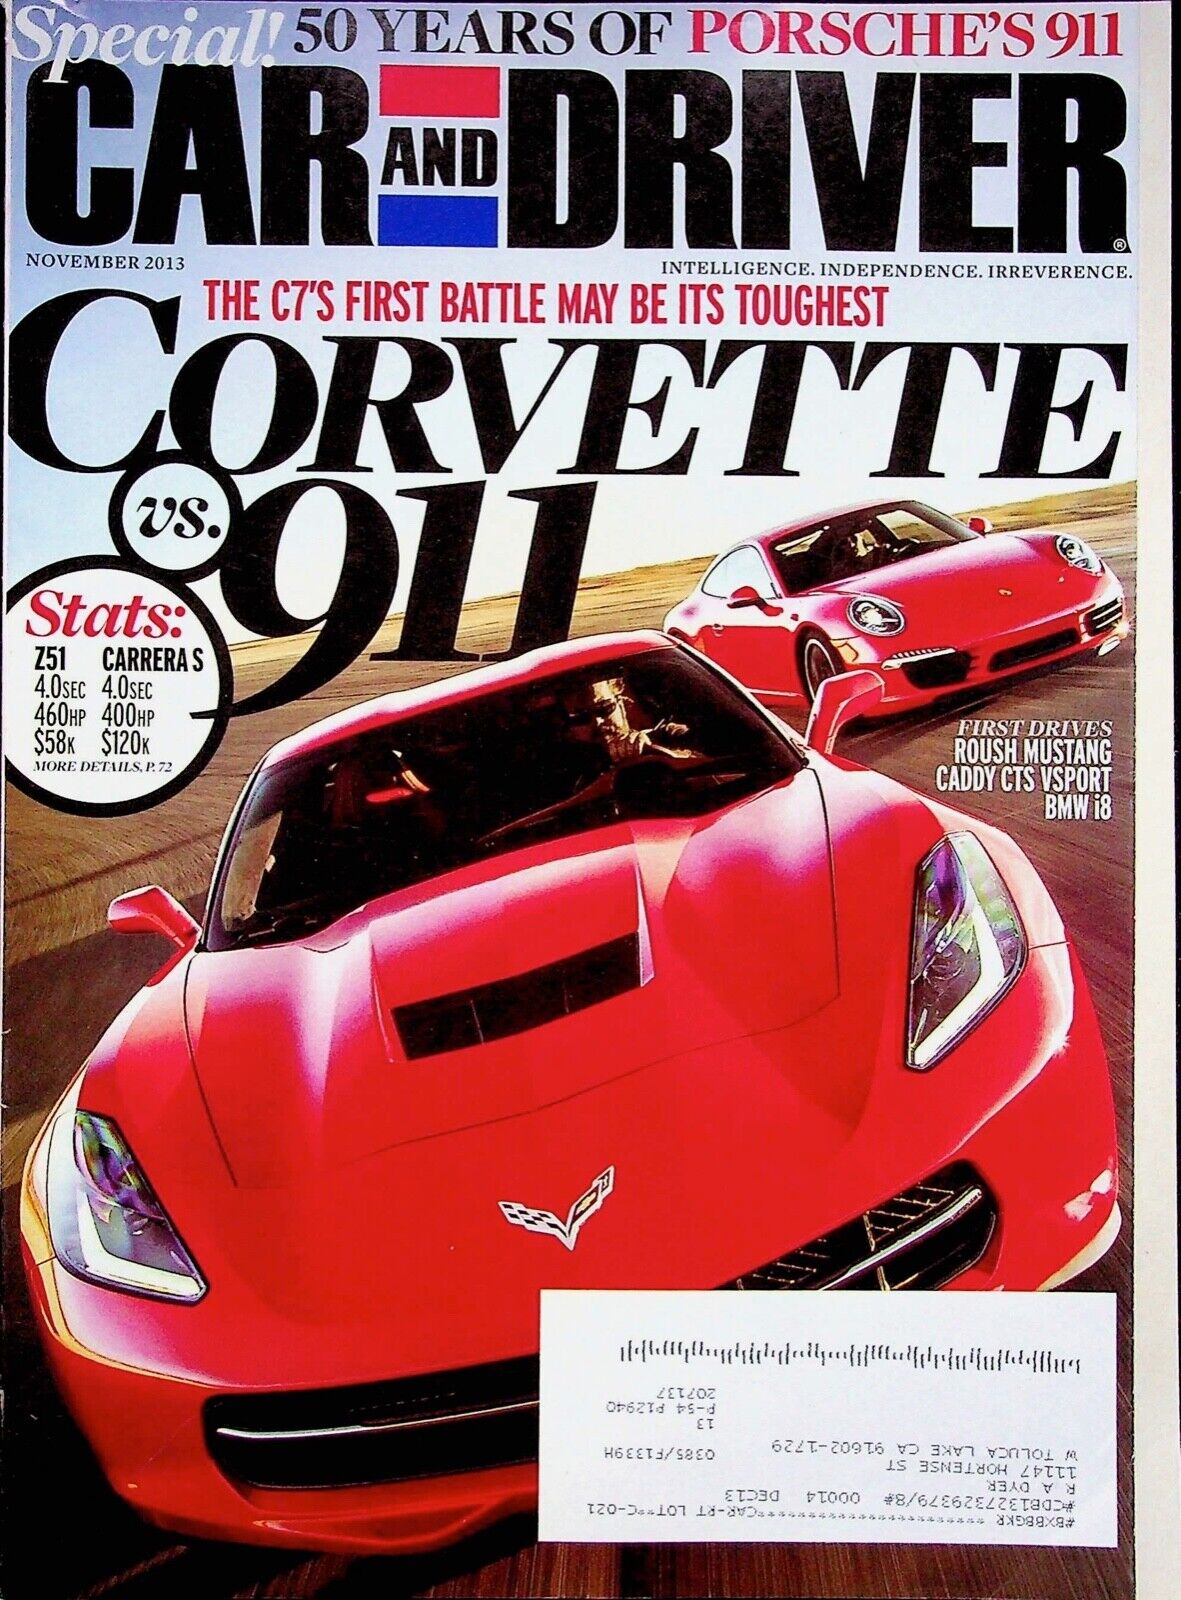 SPECIAL 50 VEARS OF PORSCHES OIL - CAR AND DRIVER MAGAZINE, NOVEMBER 2013